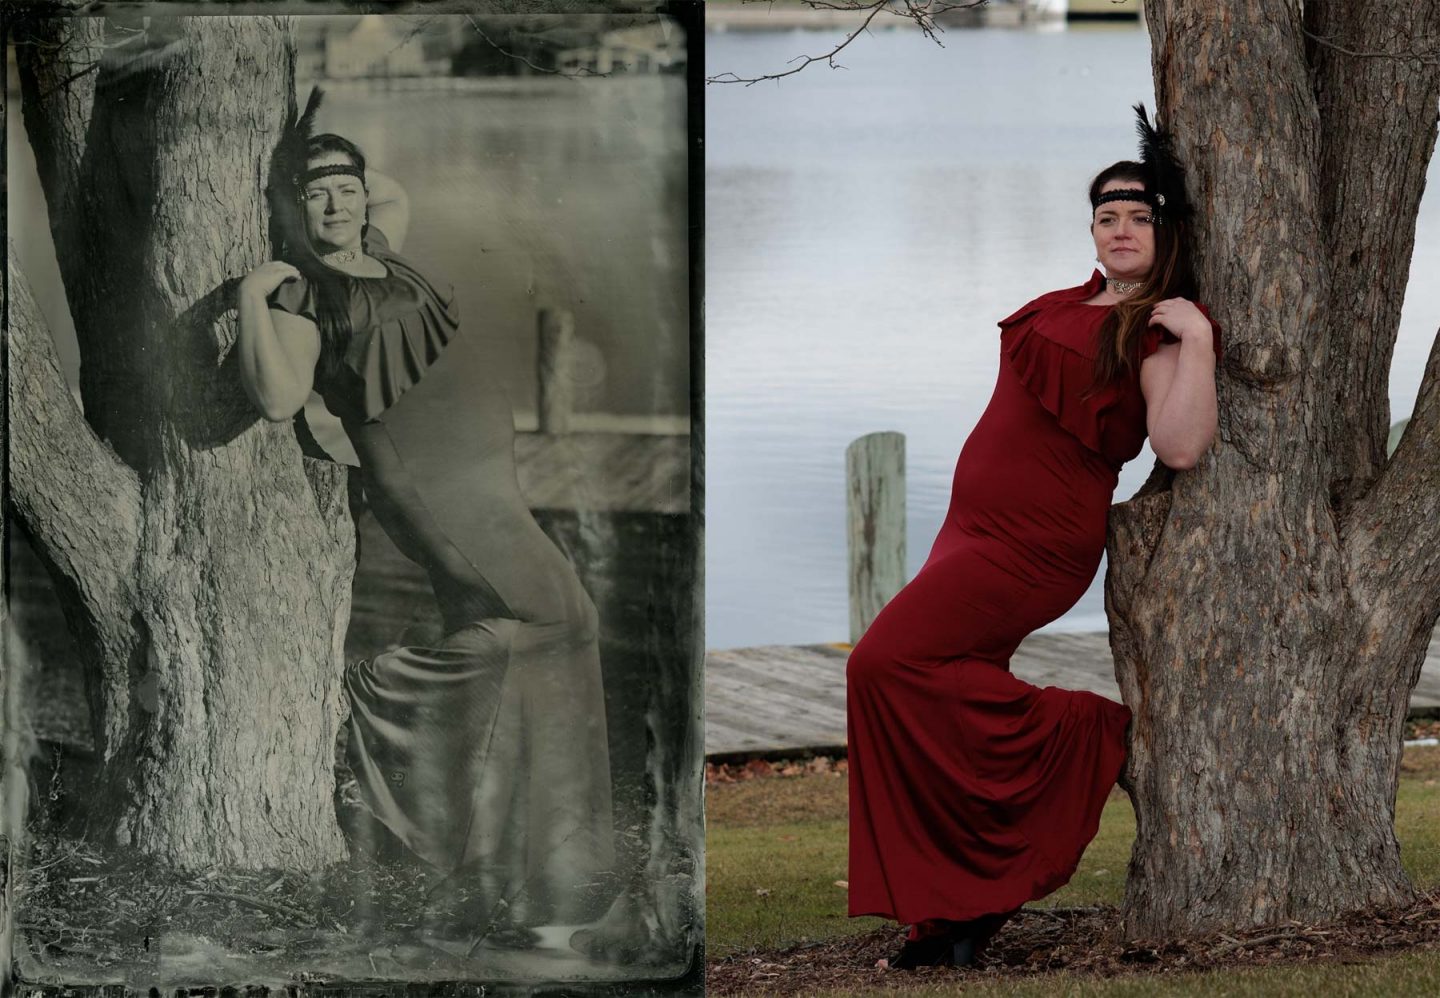 tintype compared to a digital photo